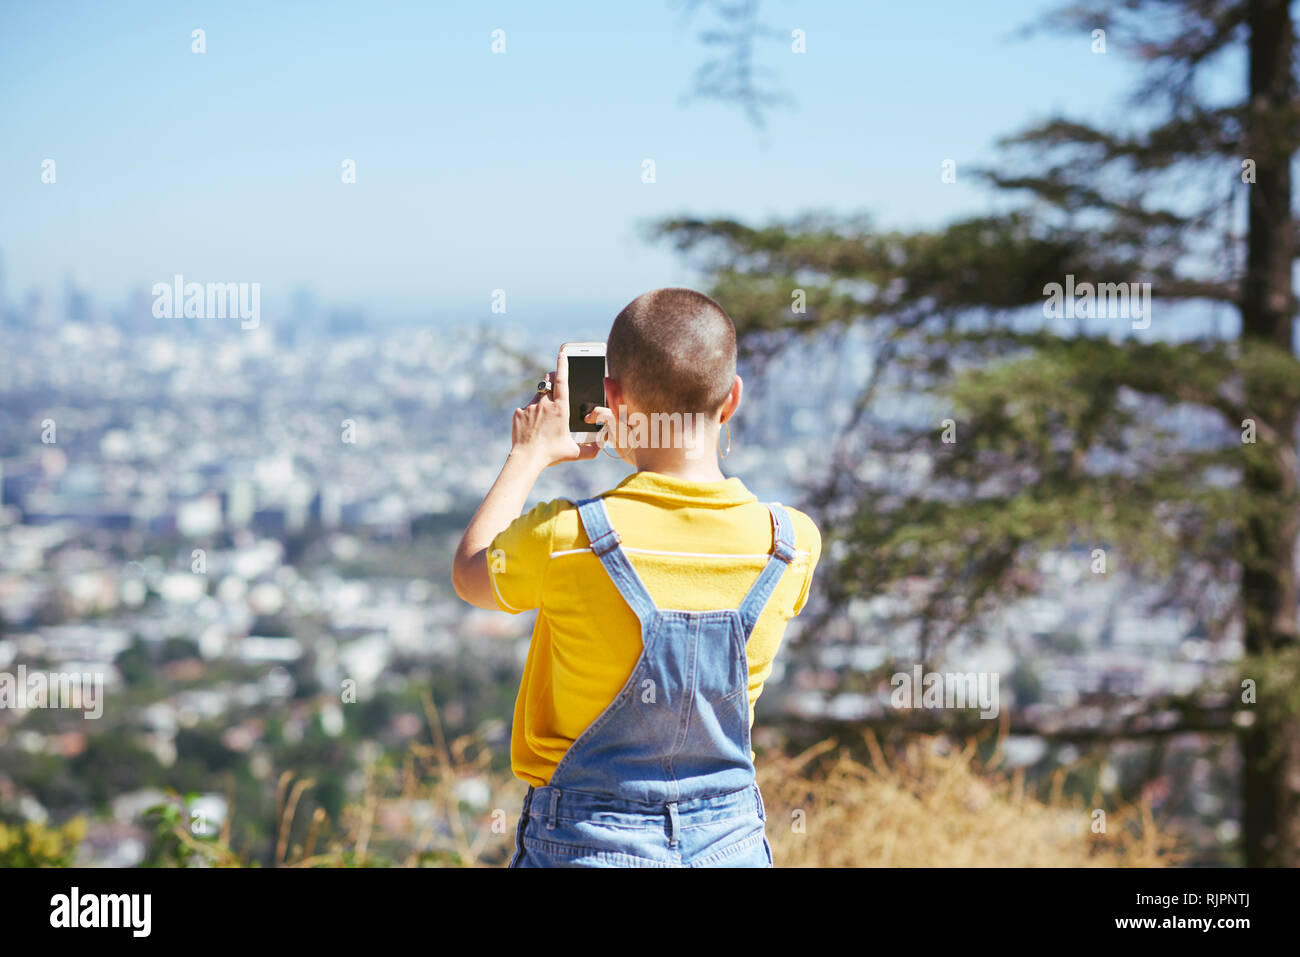 Teenage girl photographing view from cityscape hilltop, Los Angeles, California, USA Stock Photo